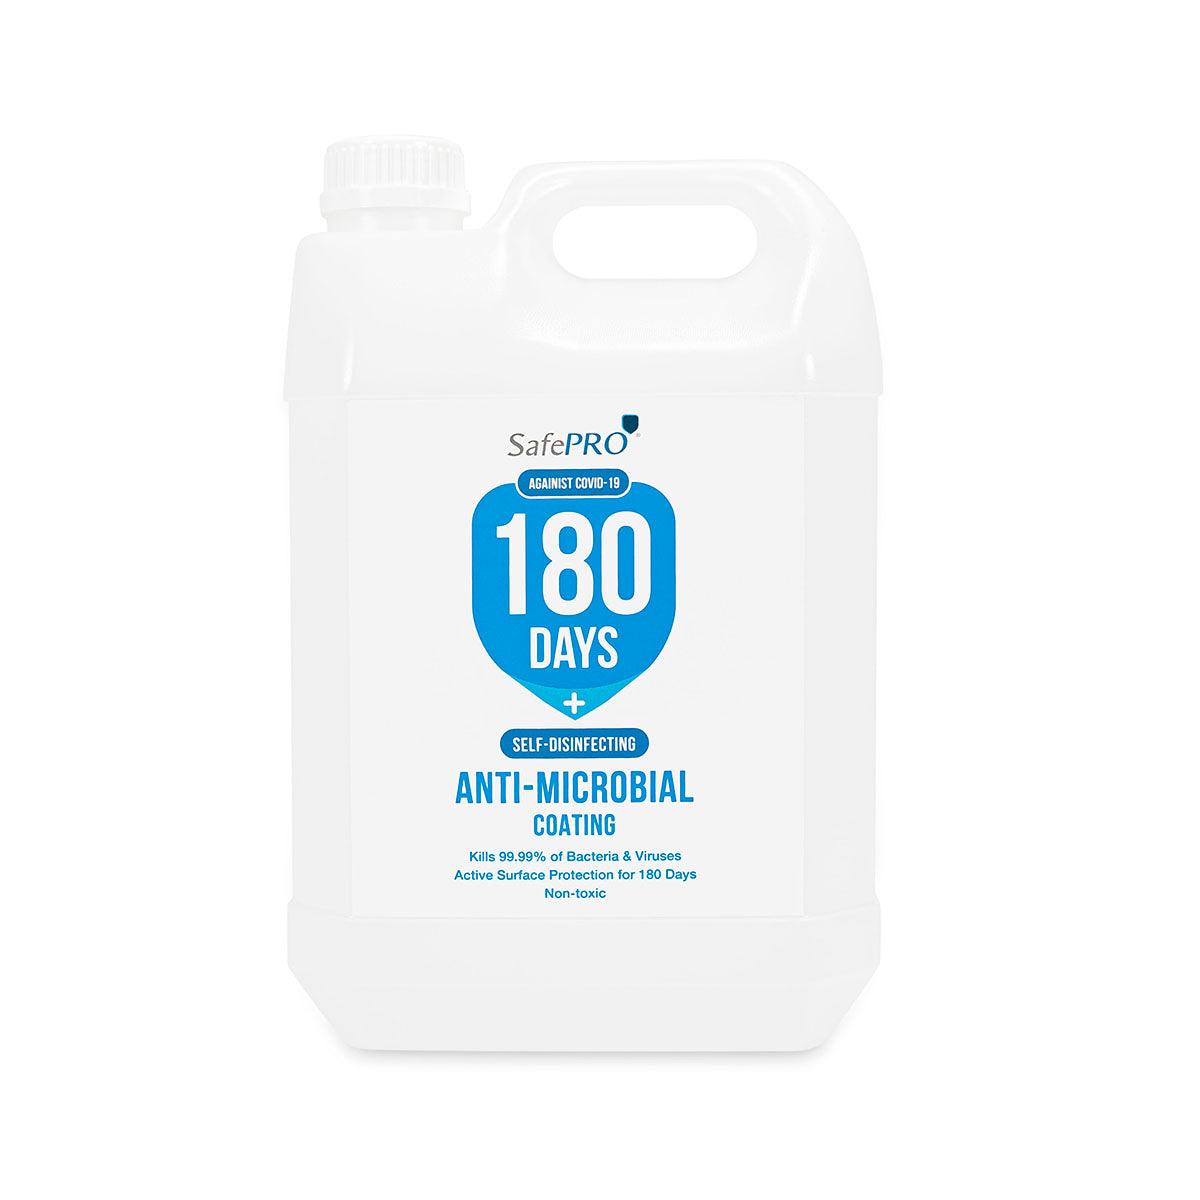 SafePRO® 180 Days Self-Disinfecting Antimicrobial Coating